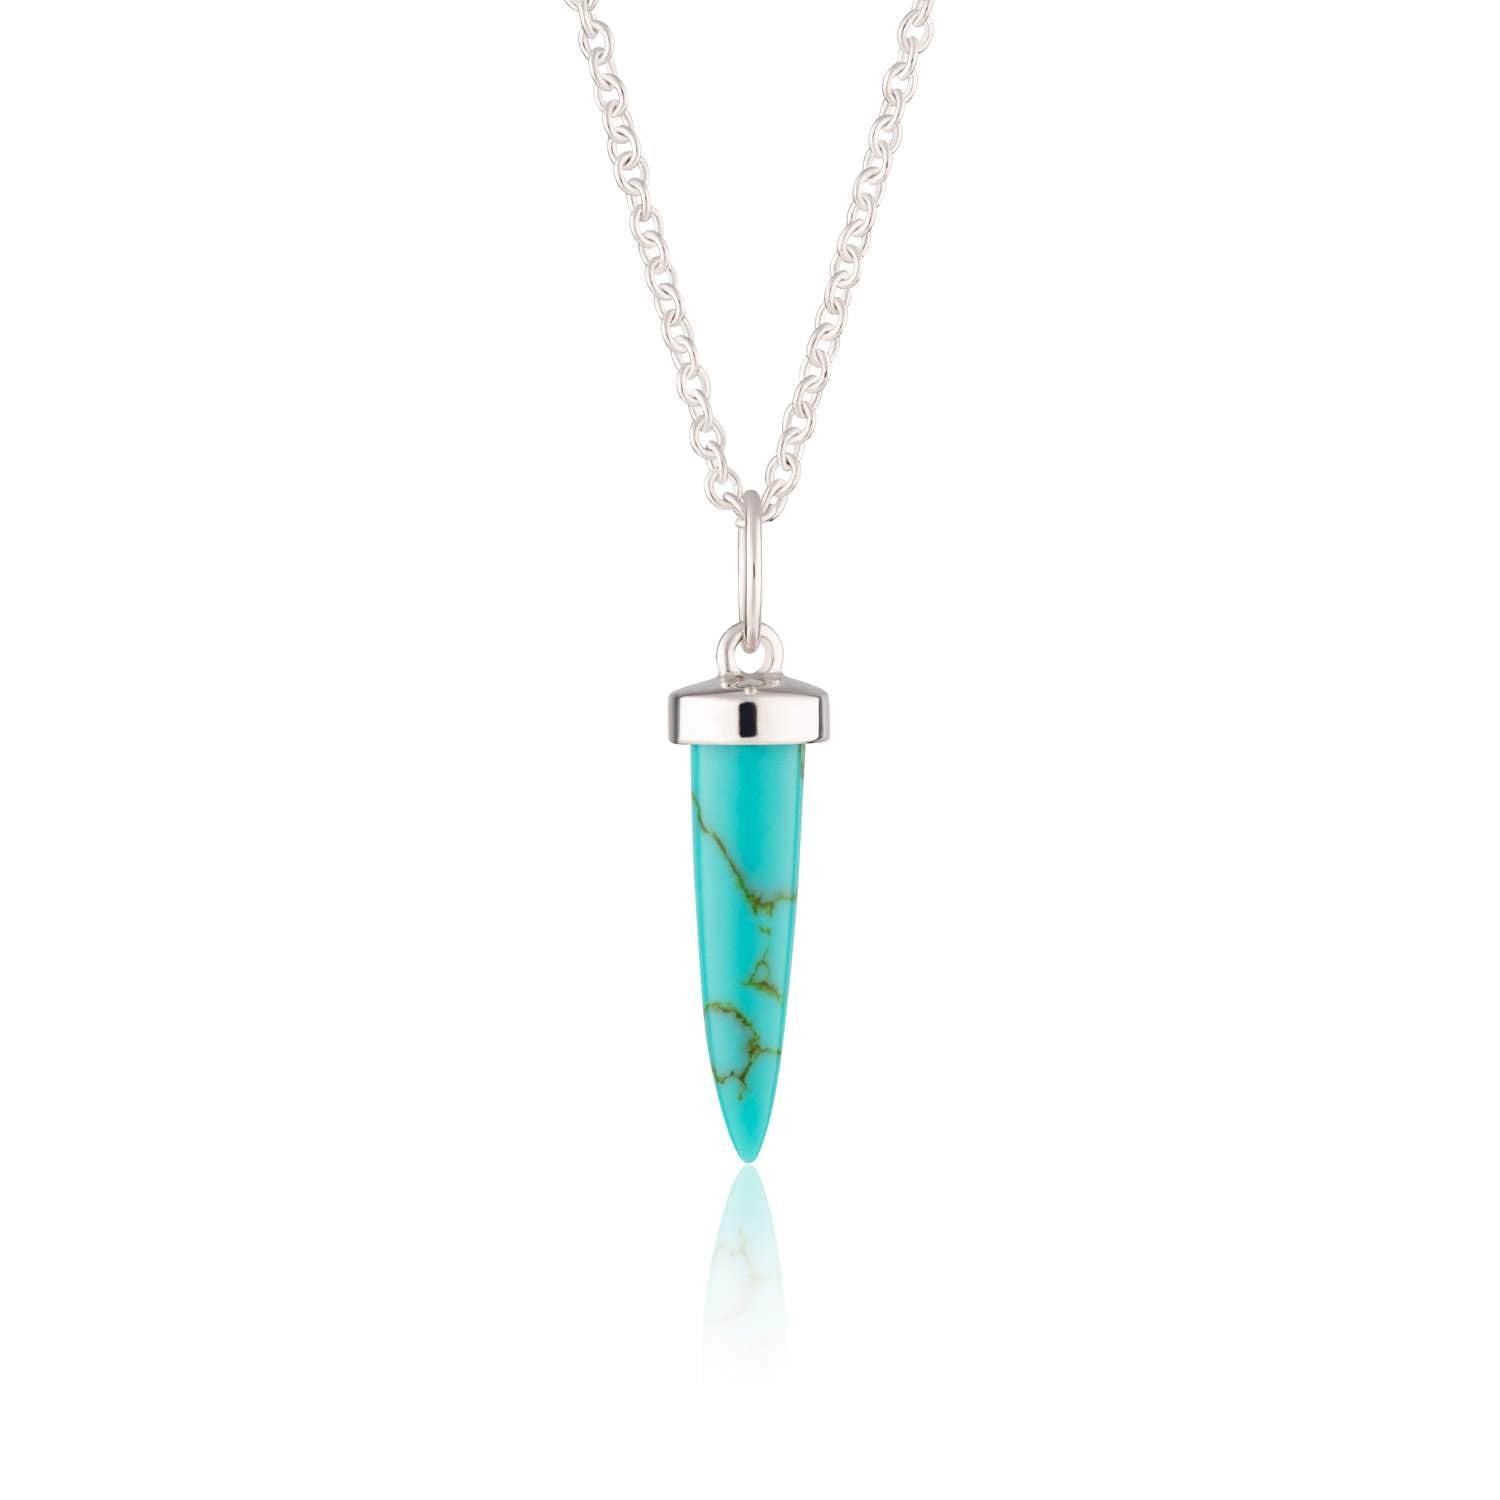 Turquoise Spike Necklace with Slider Clasp